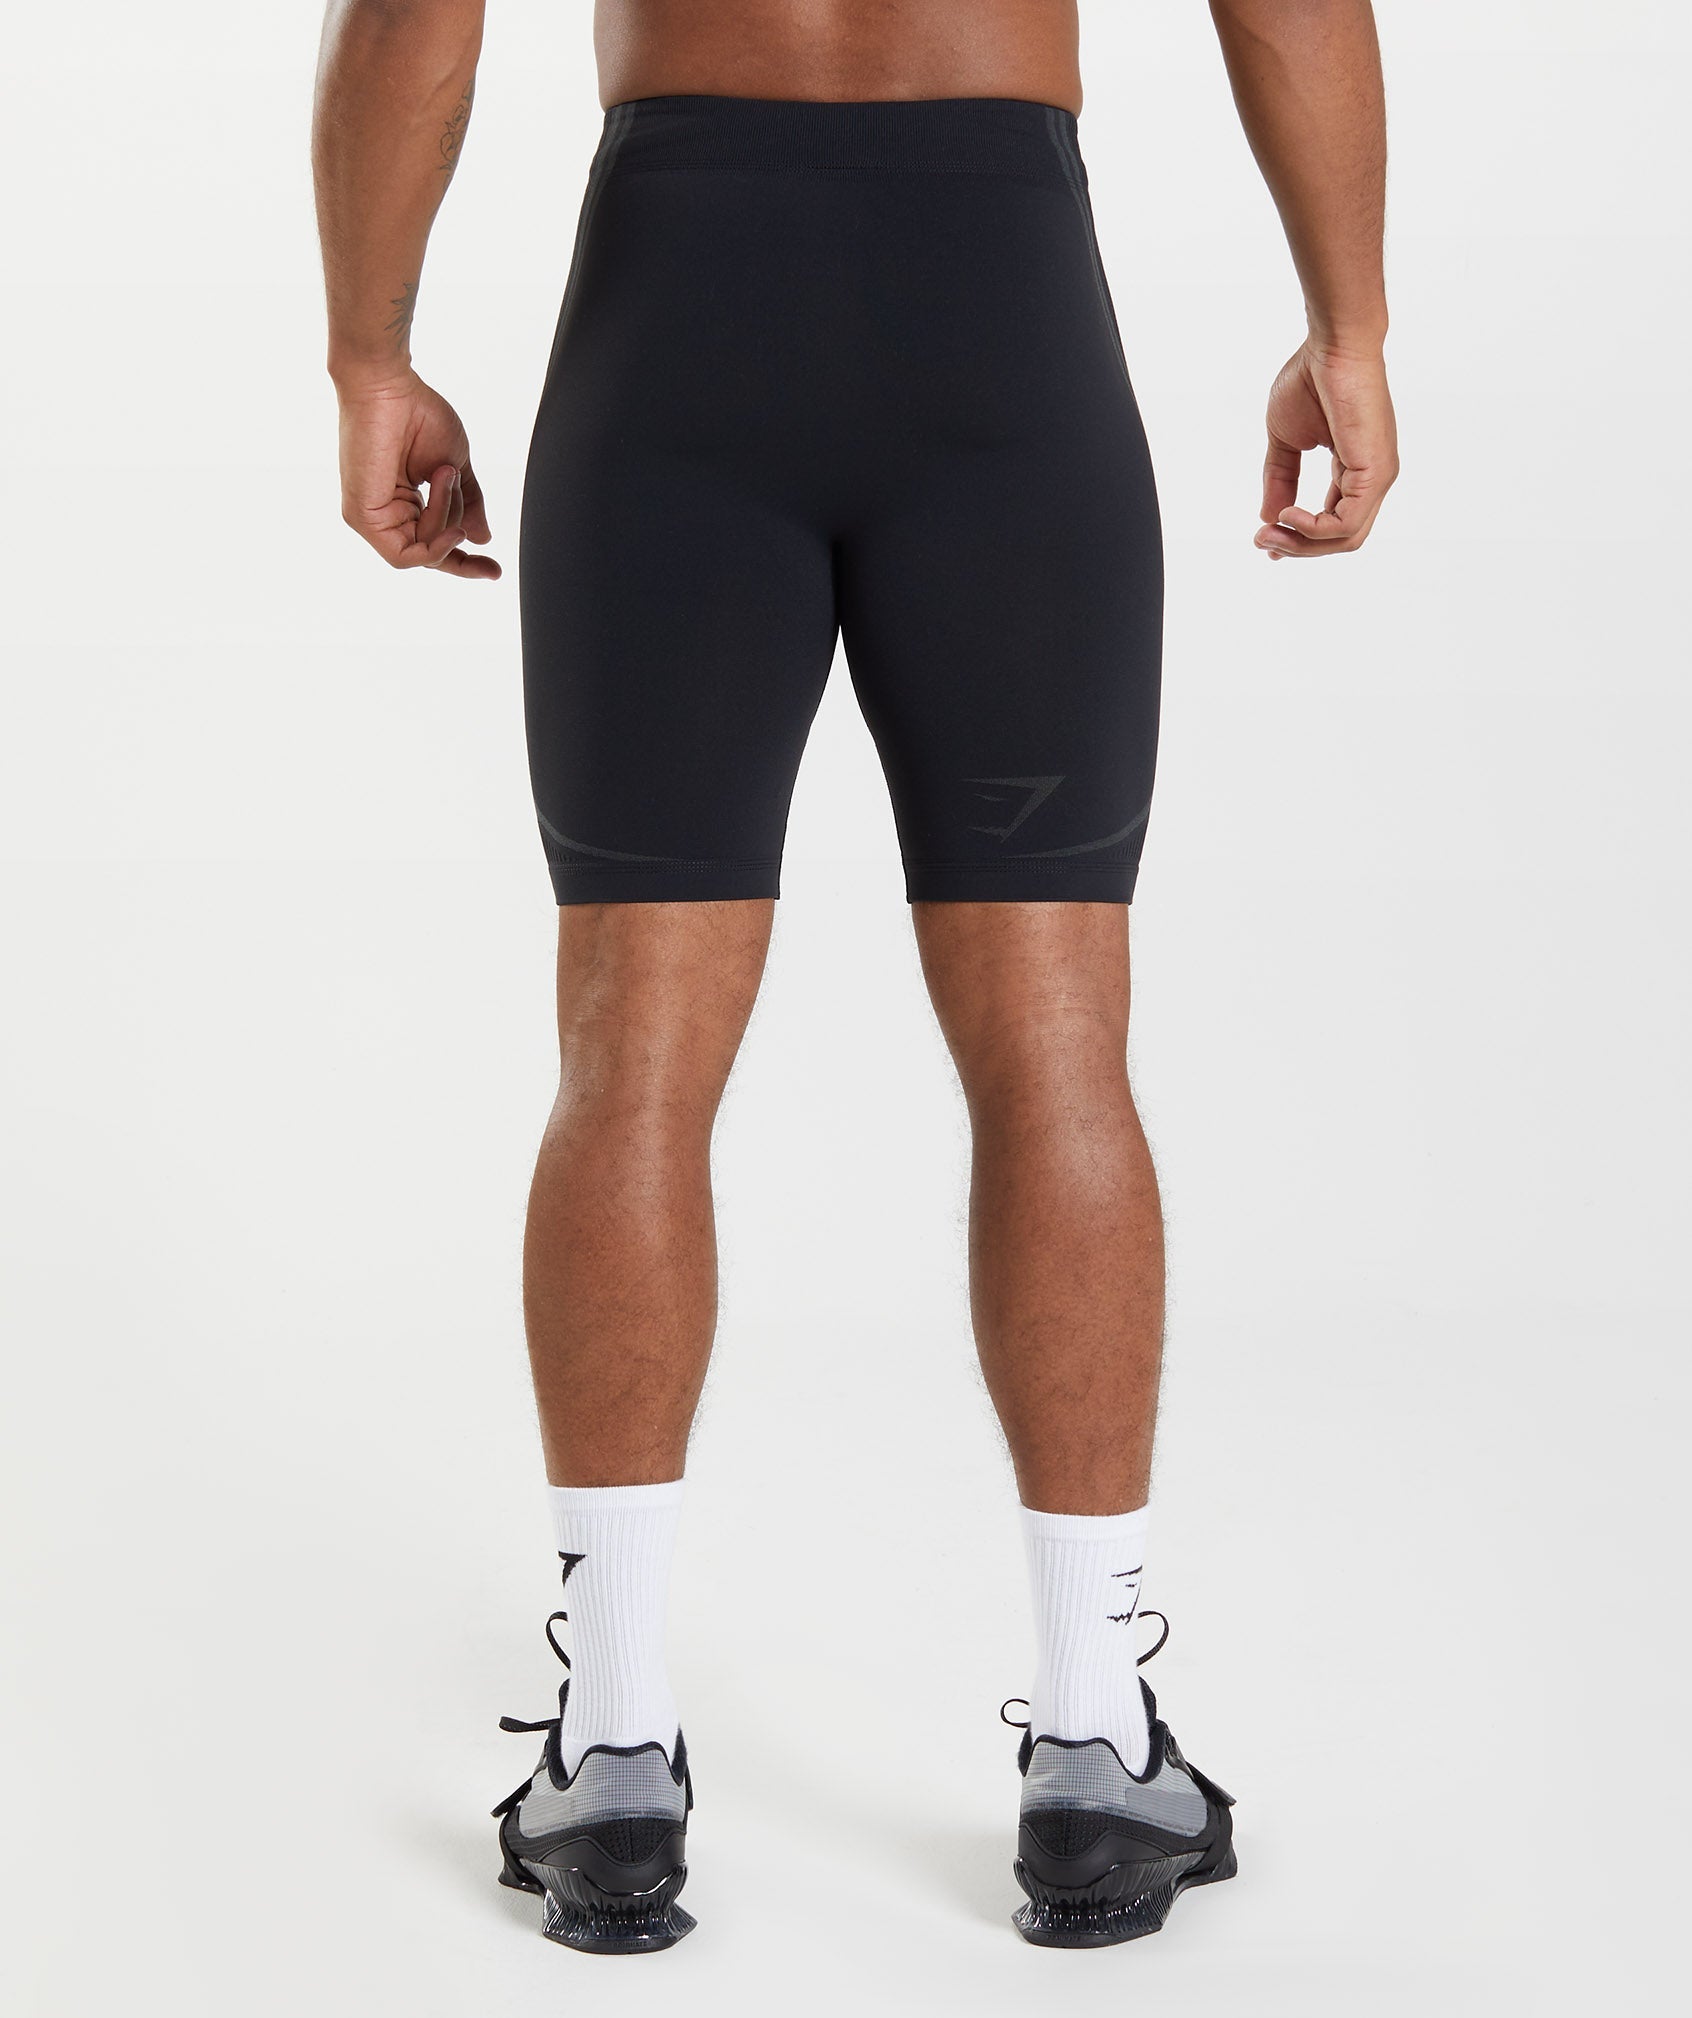 315 Seamless 1/2 Shorts in Black/Charcoal Grey